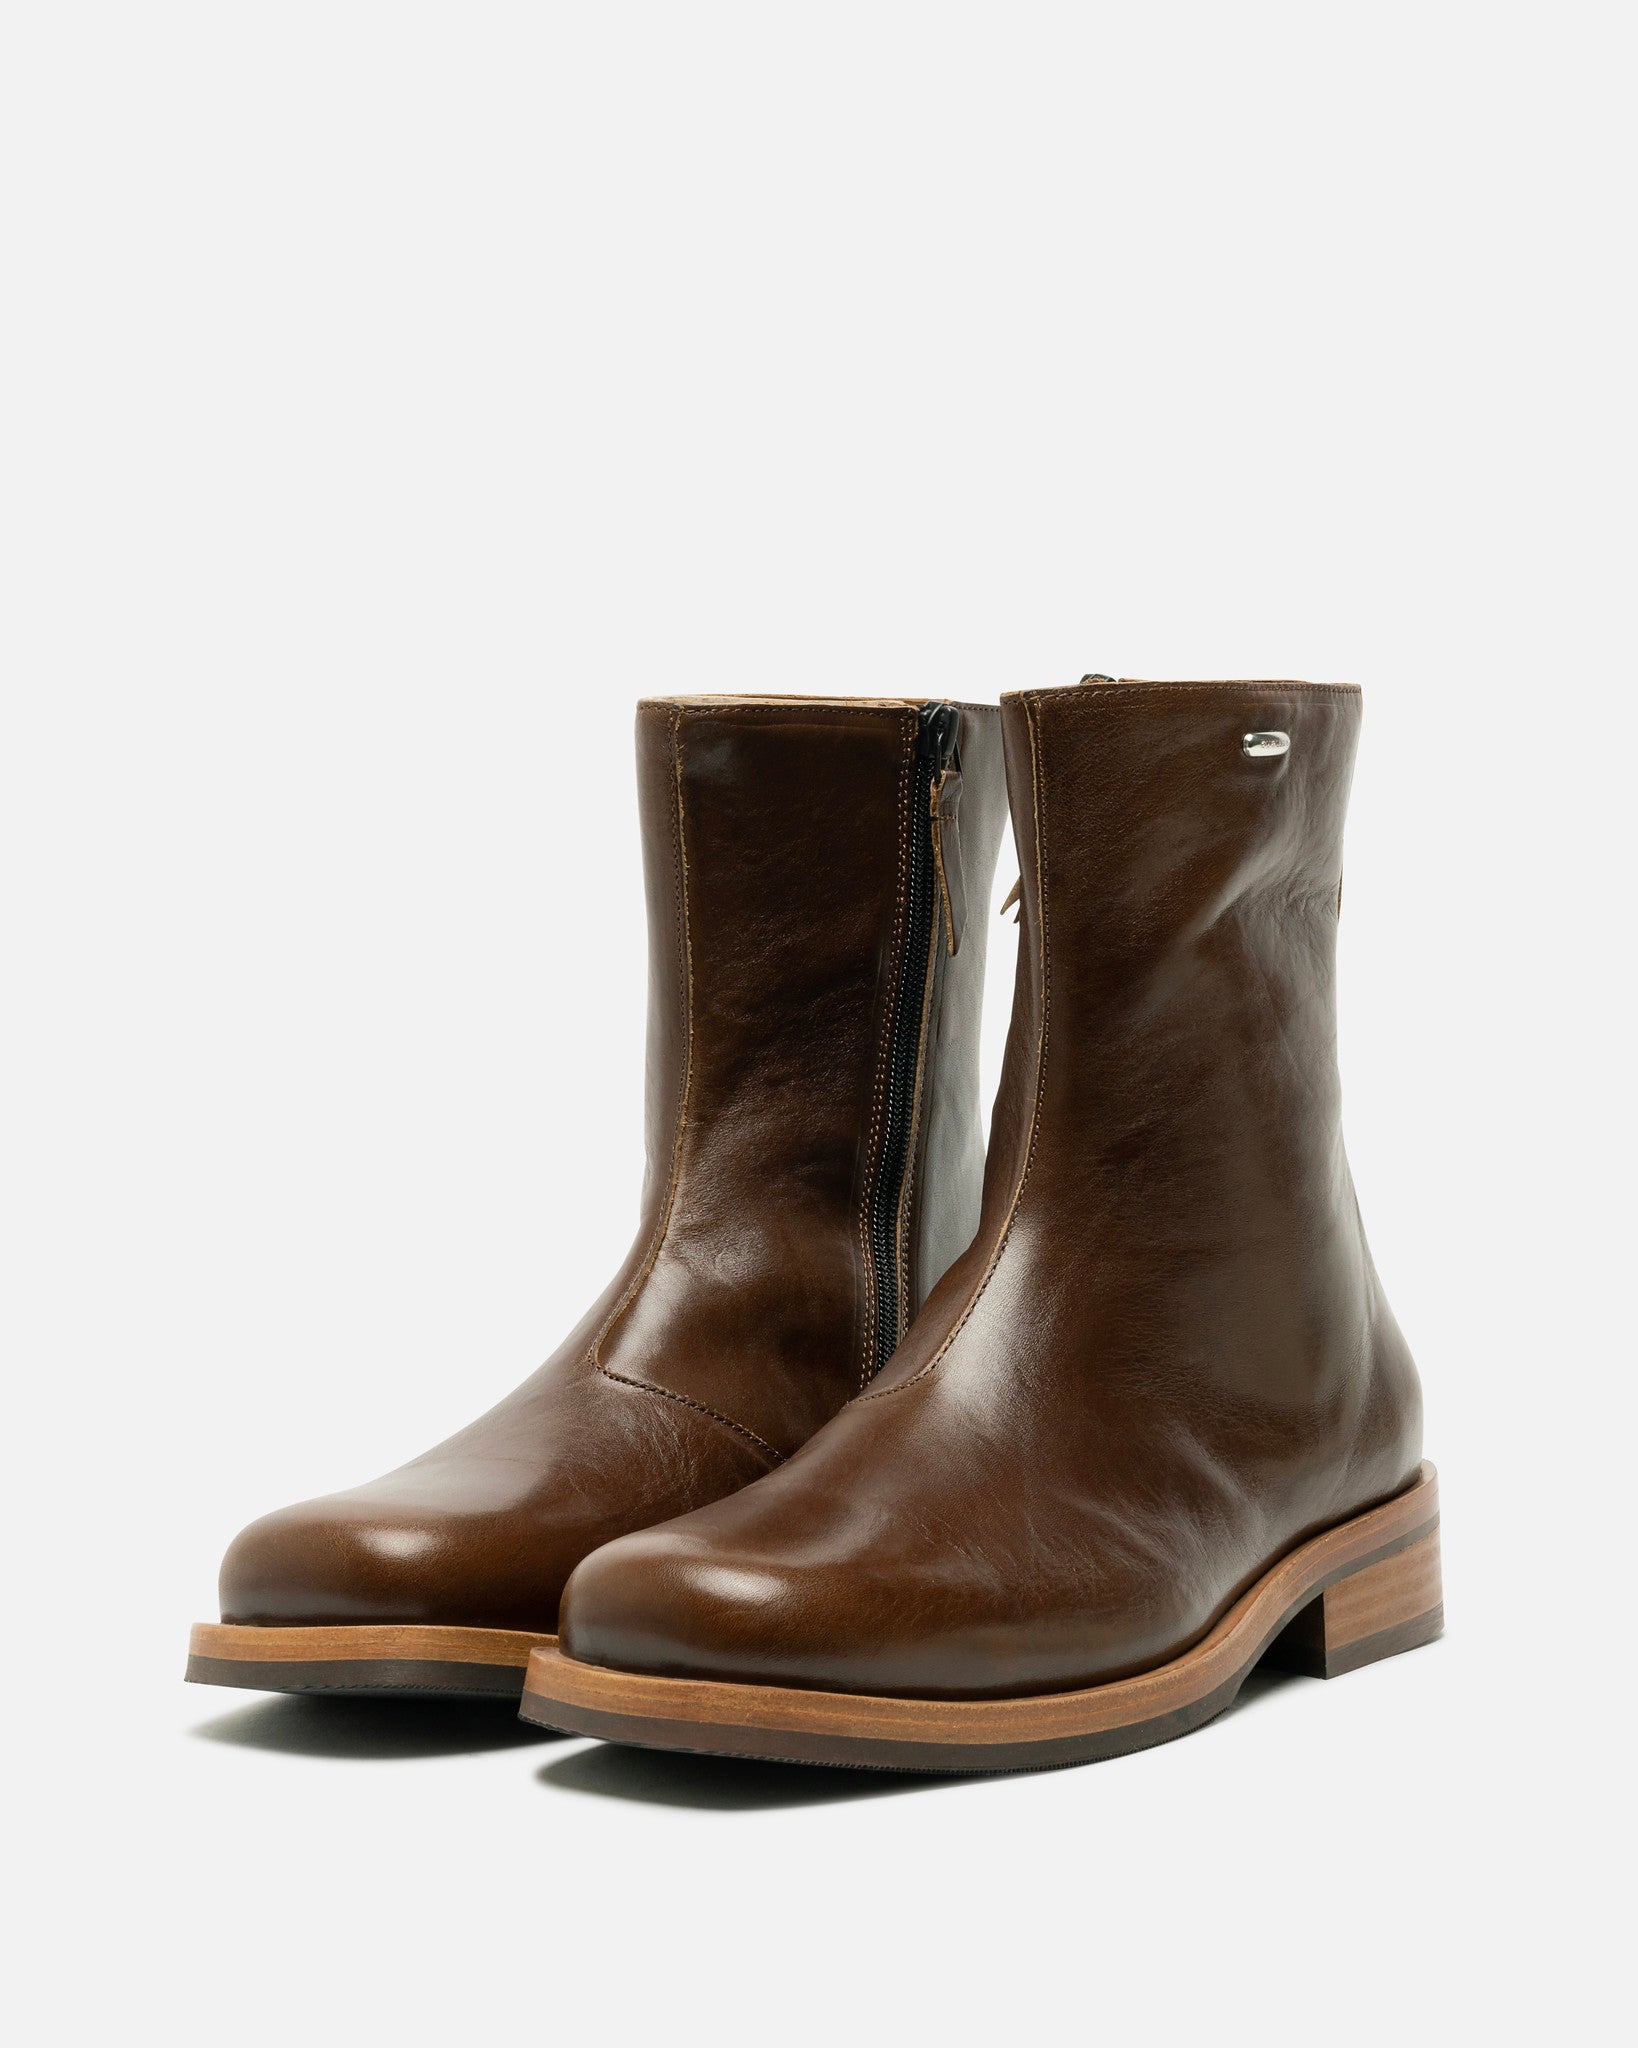 Our Legacy Men's Boots Camion Boot in Woodstock Leather